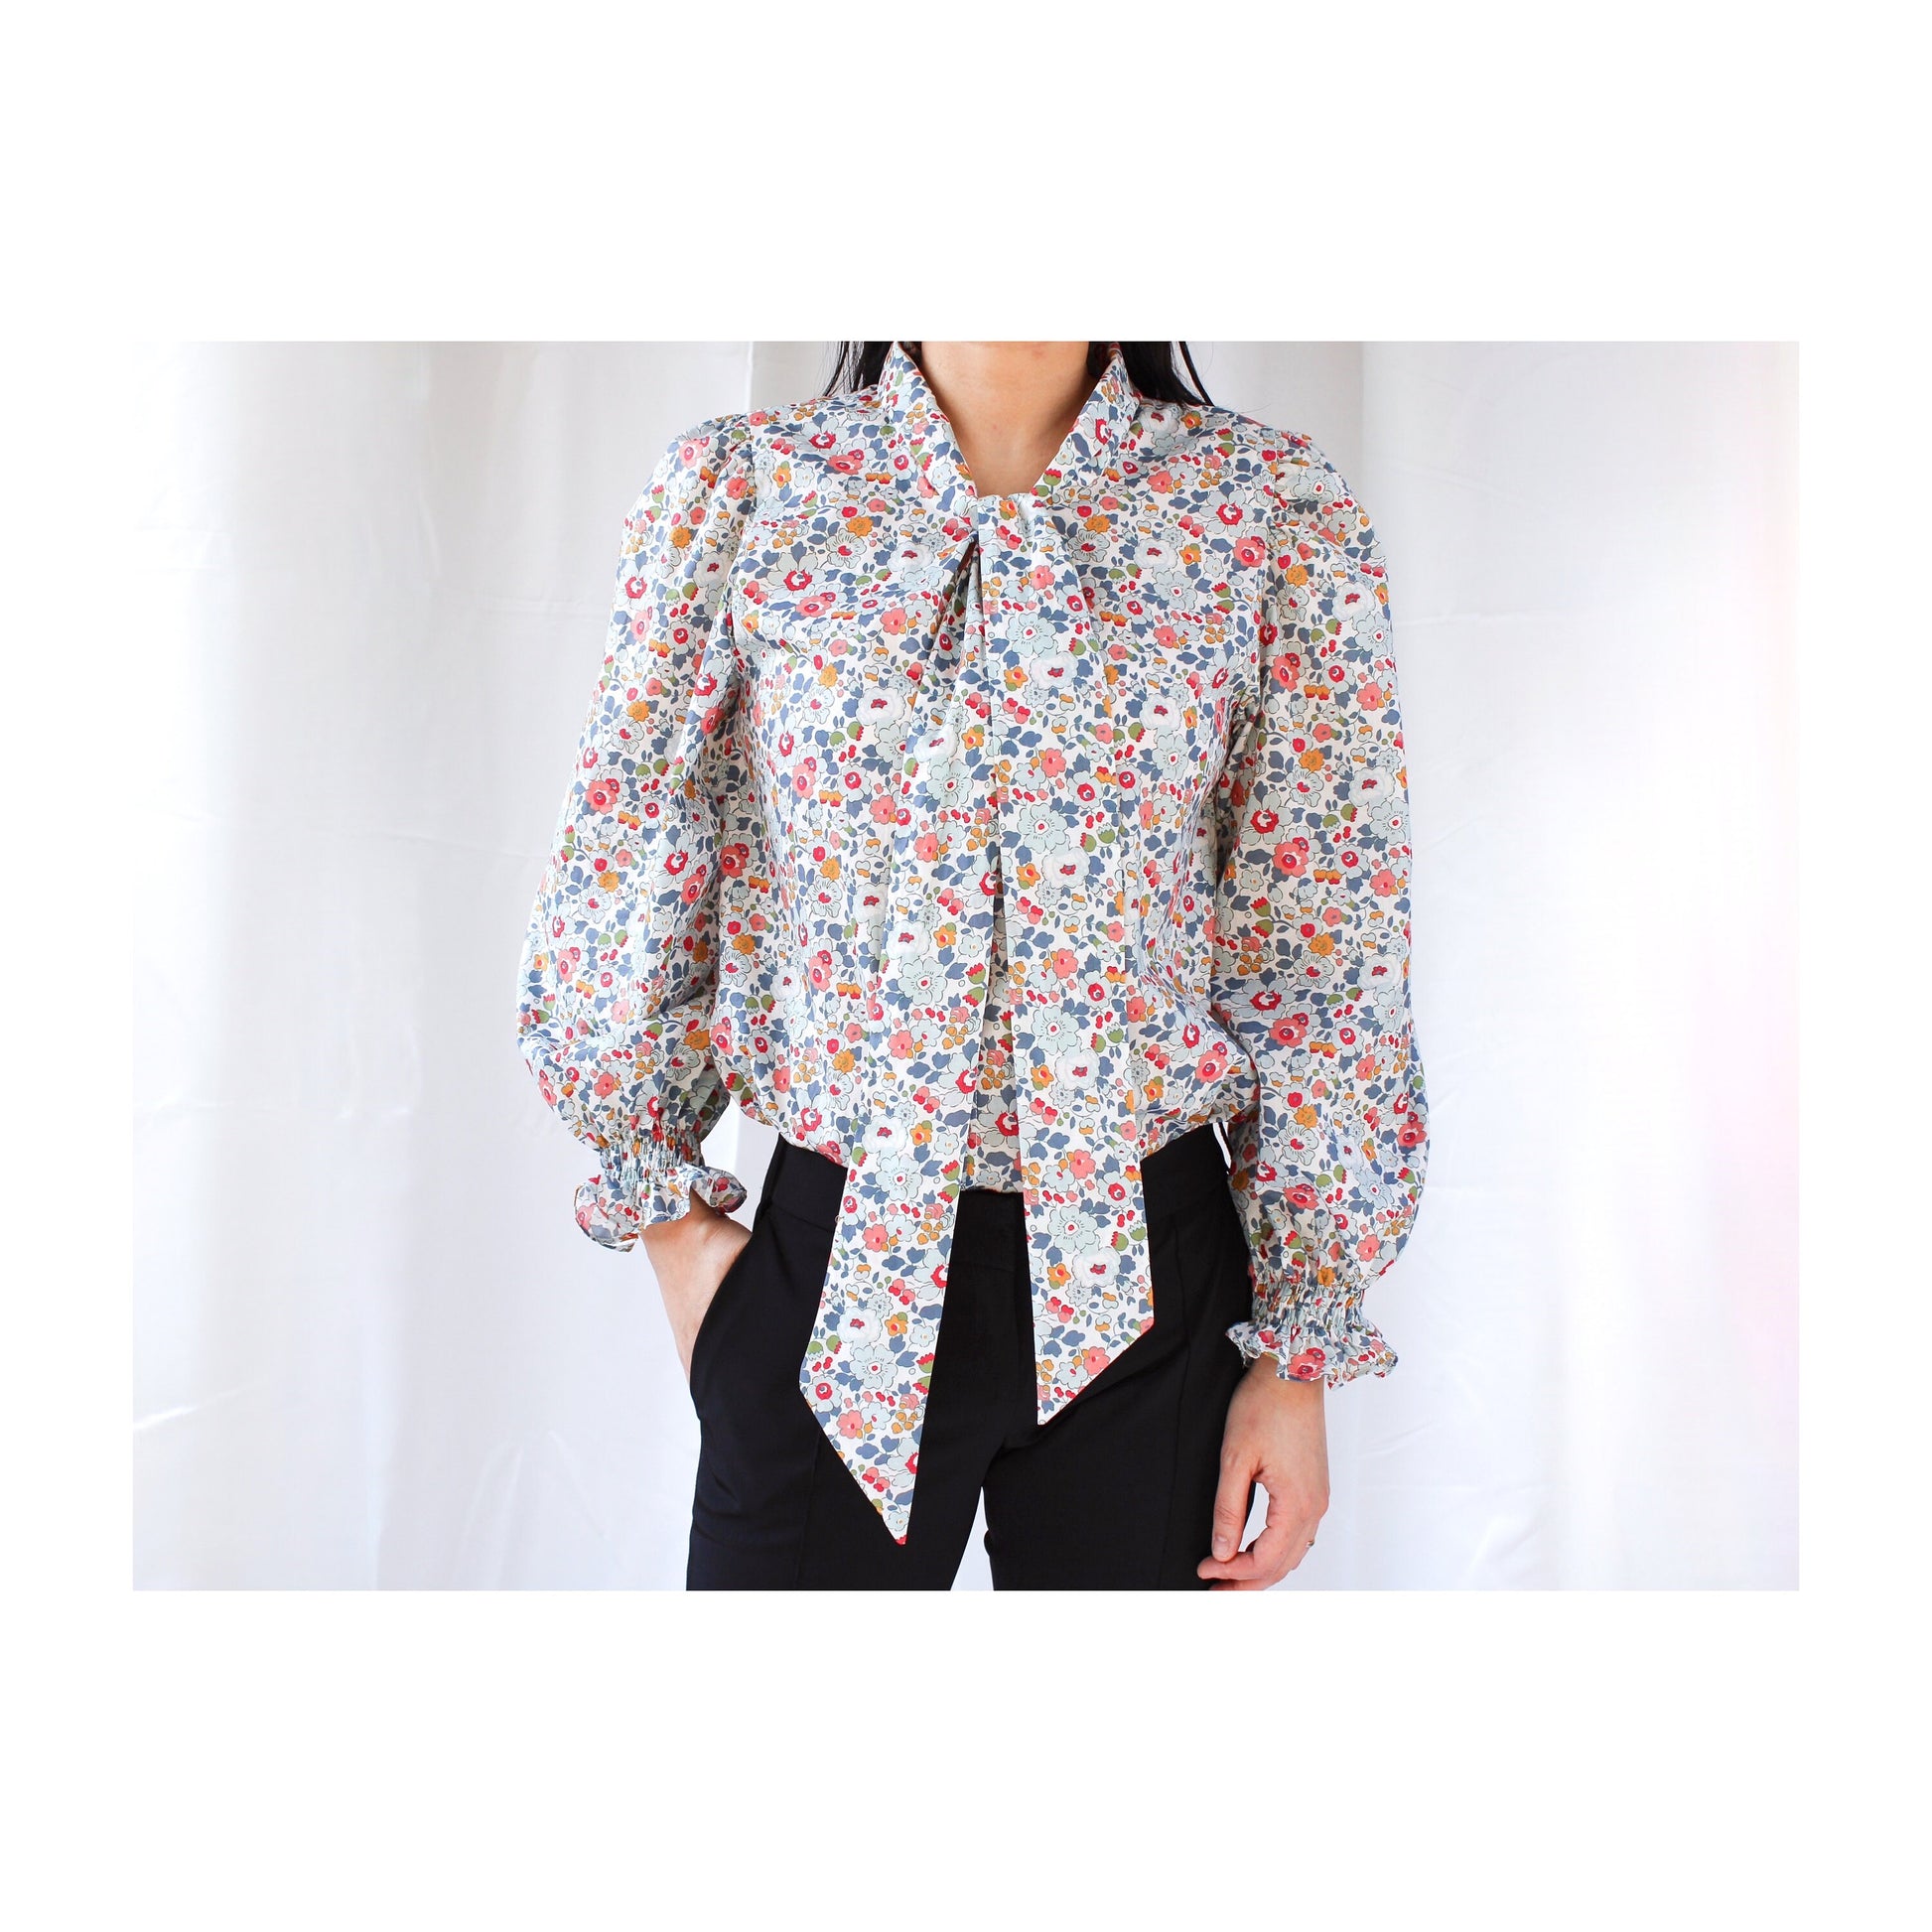 Liberty of London women blouse top shirt organic cotton floral animal print button through puffy short long half 3/4 sleeves sleeveless Peter Pan collar ruffle V-neck pussy bow tie classic office daily wear elegant classy sexy shirt special occasion